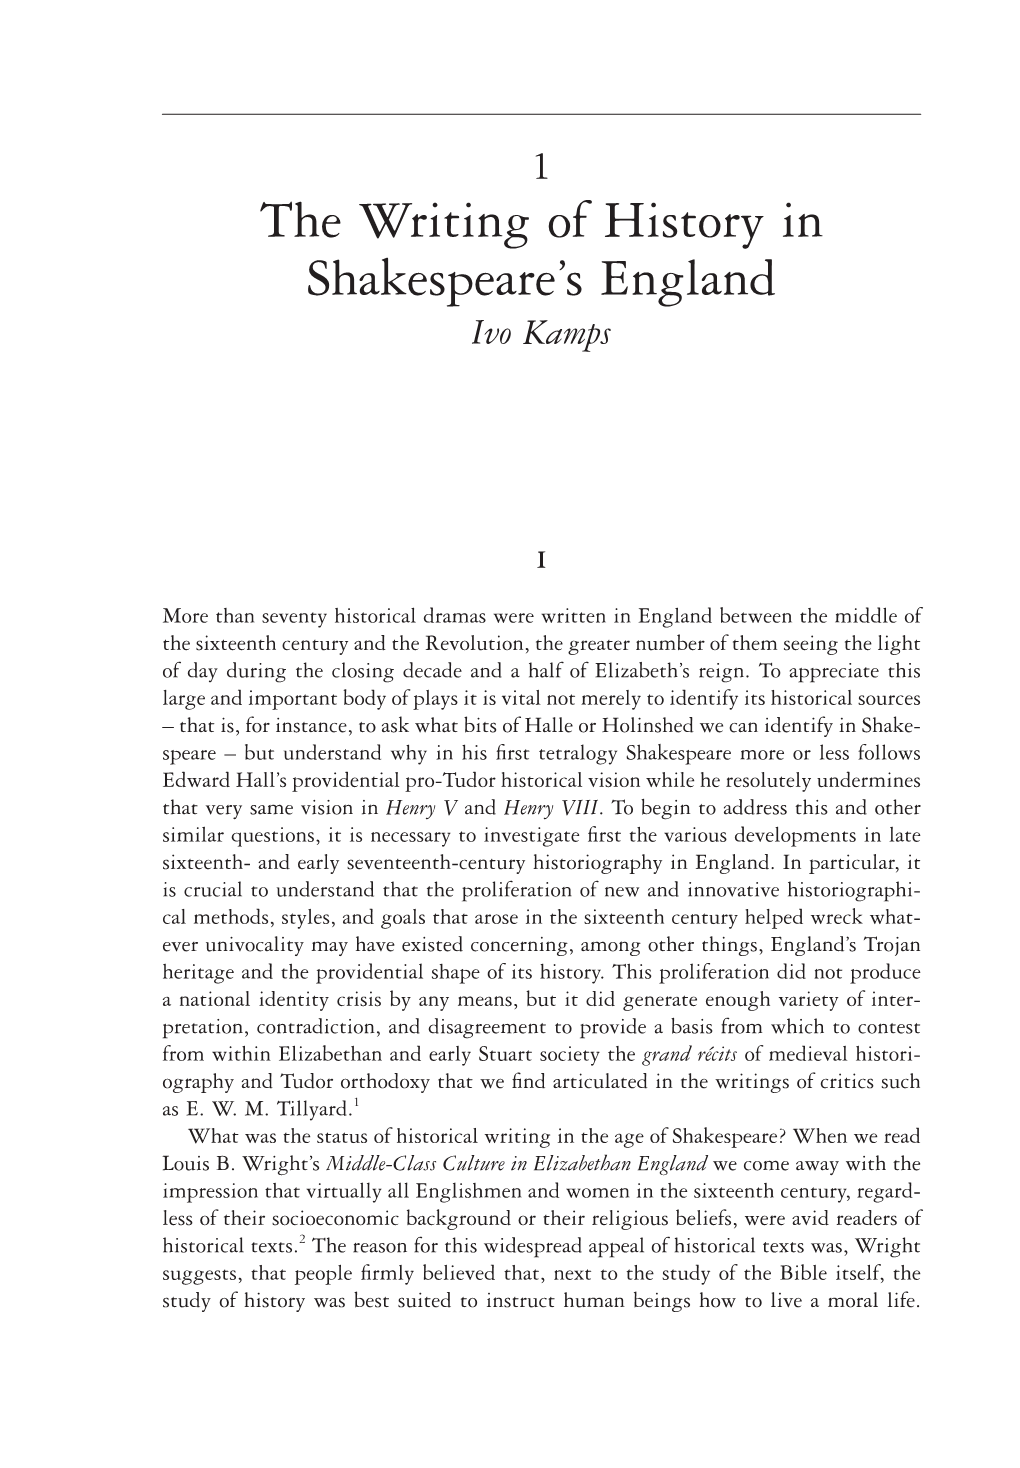 The Writing of History in Shakespeare's England